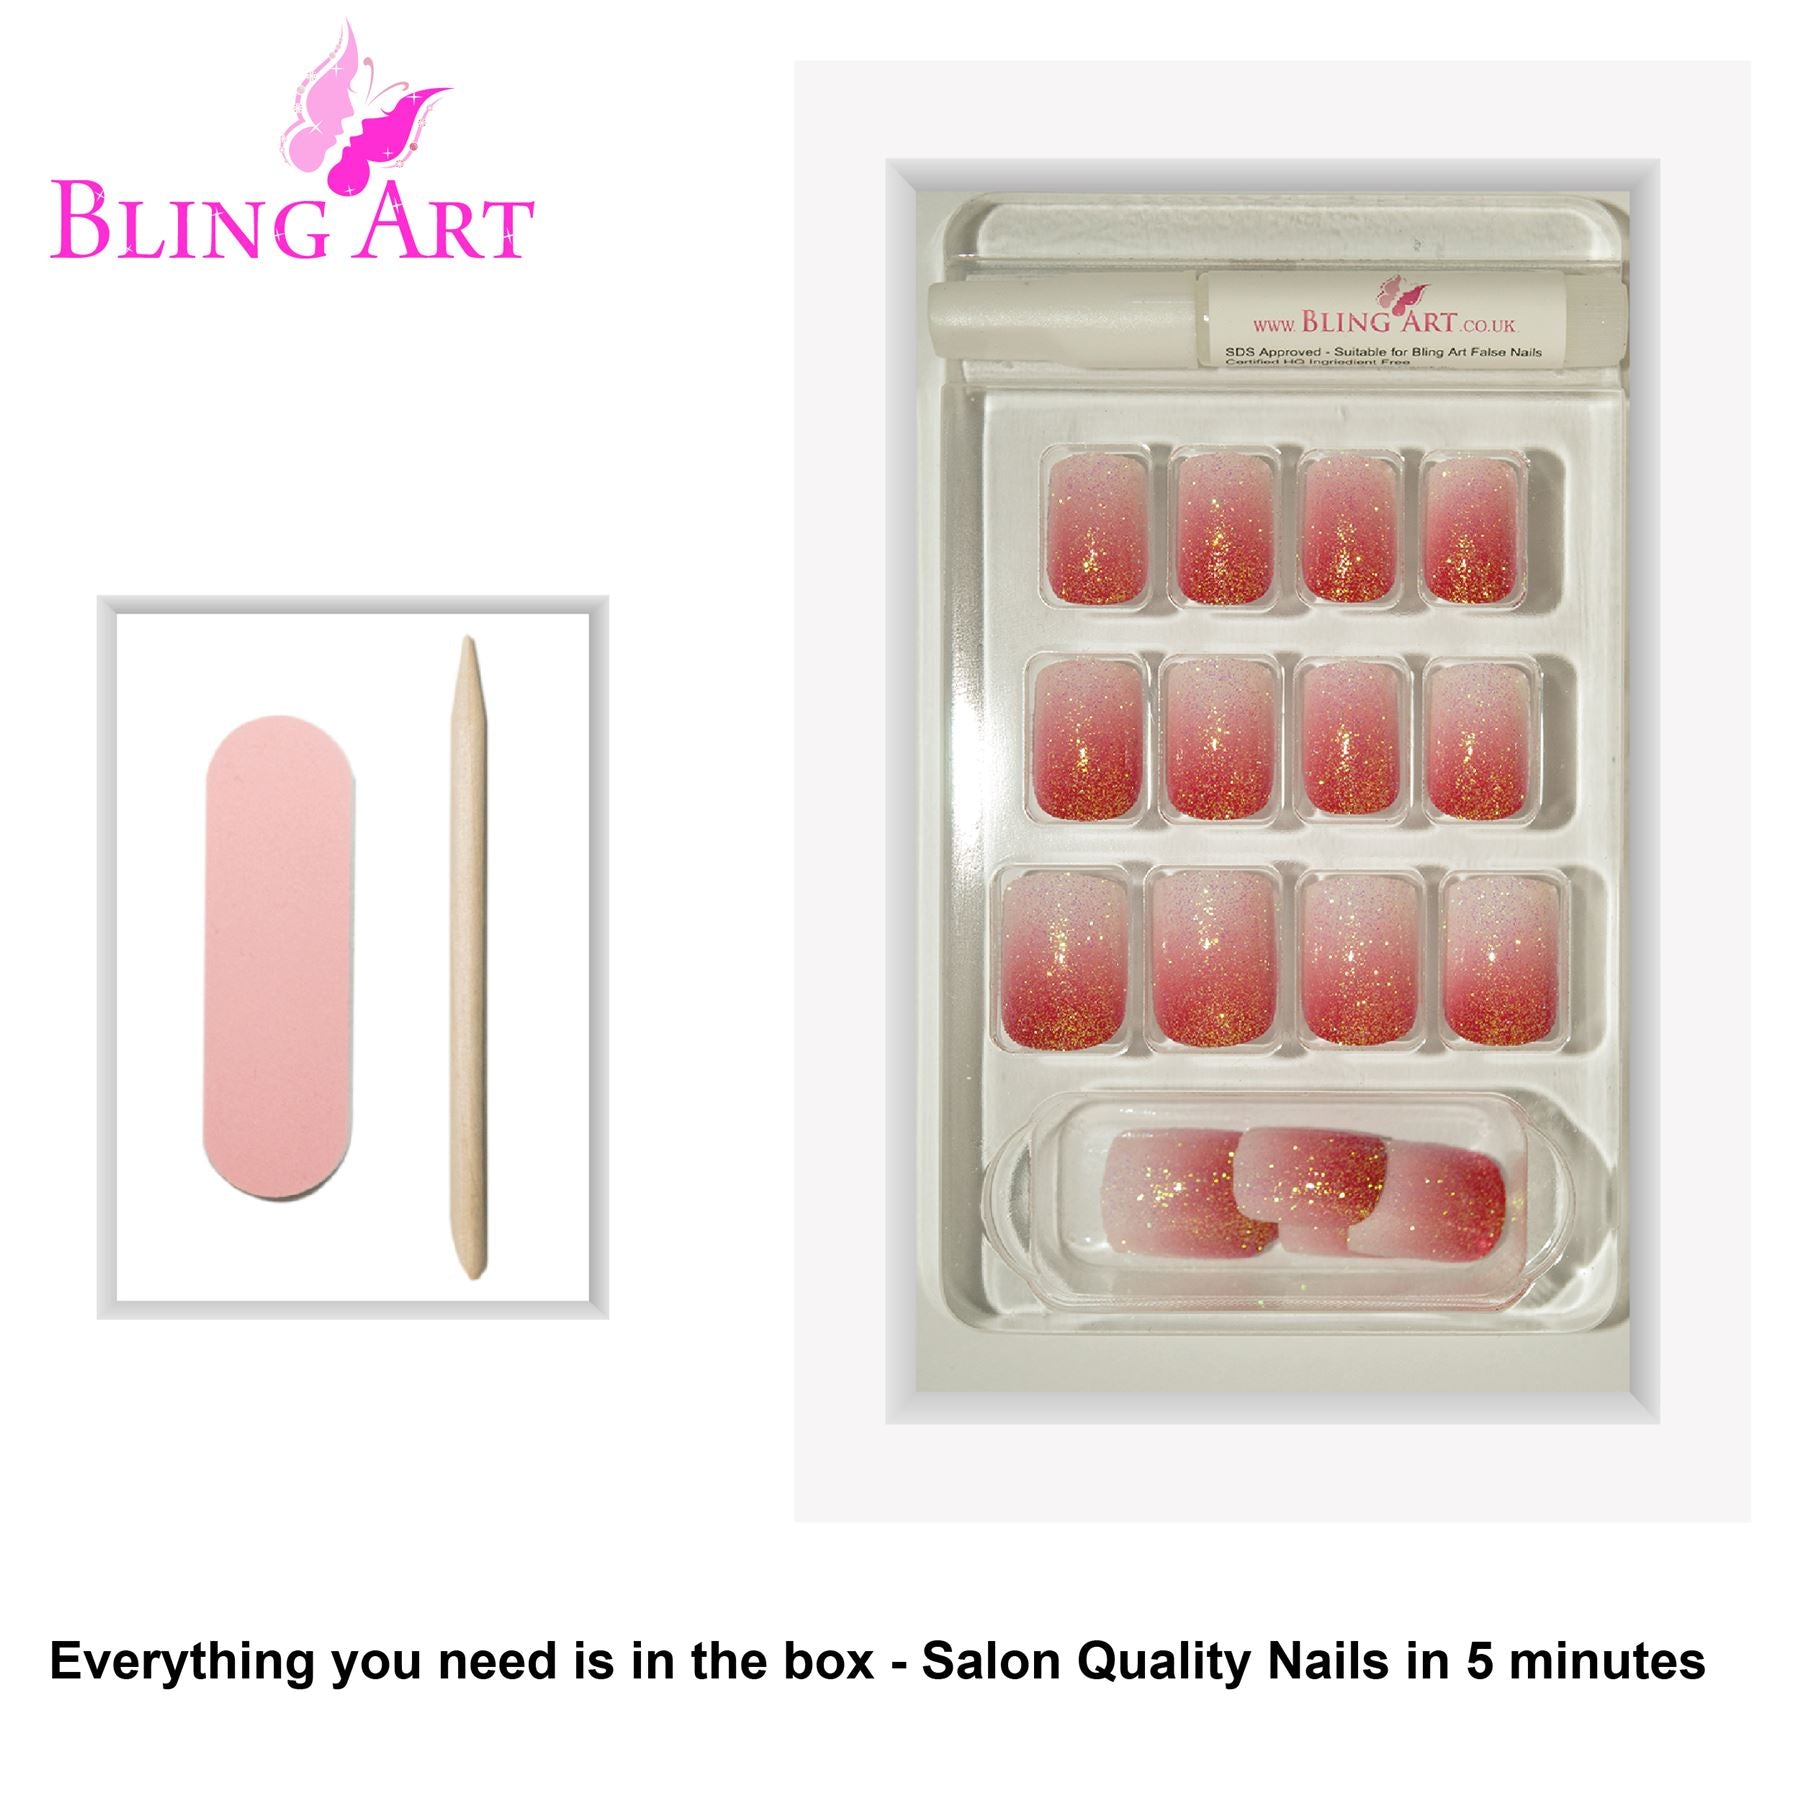 False Nails by Bling Art Red Gel Ombre French Squoval 24 Fake Medium Tips